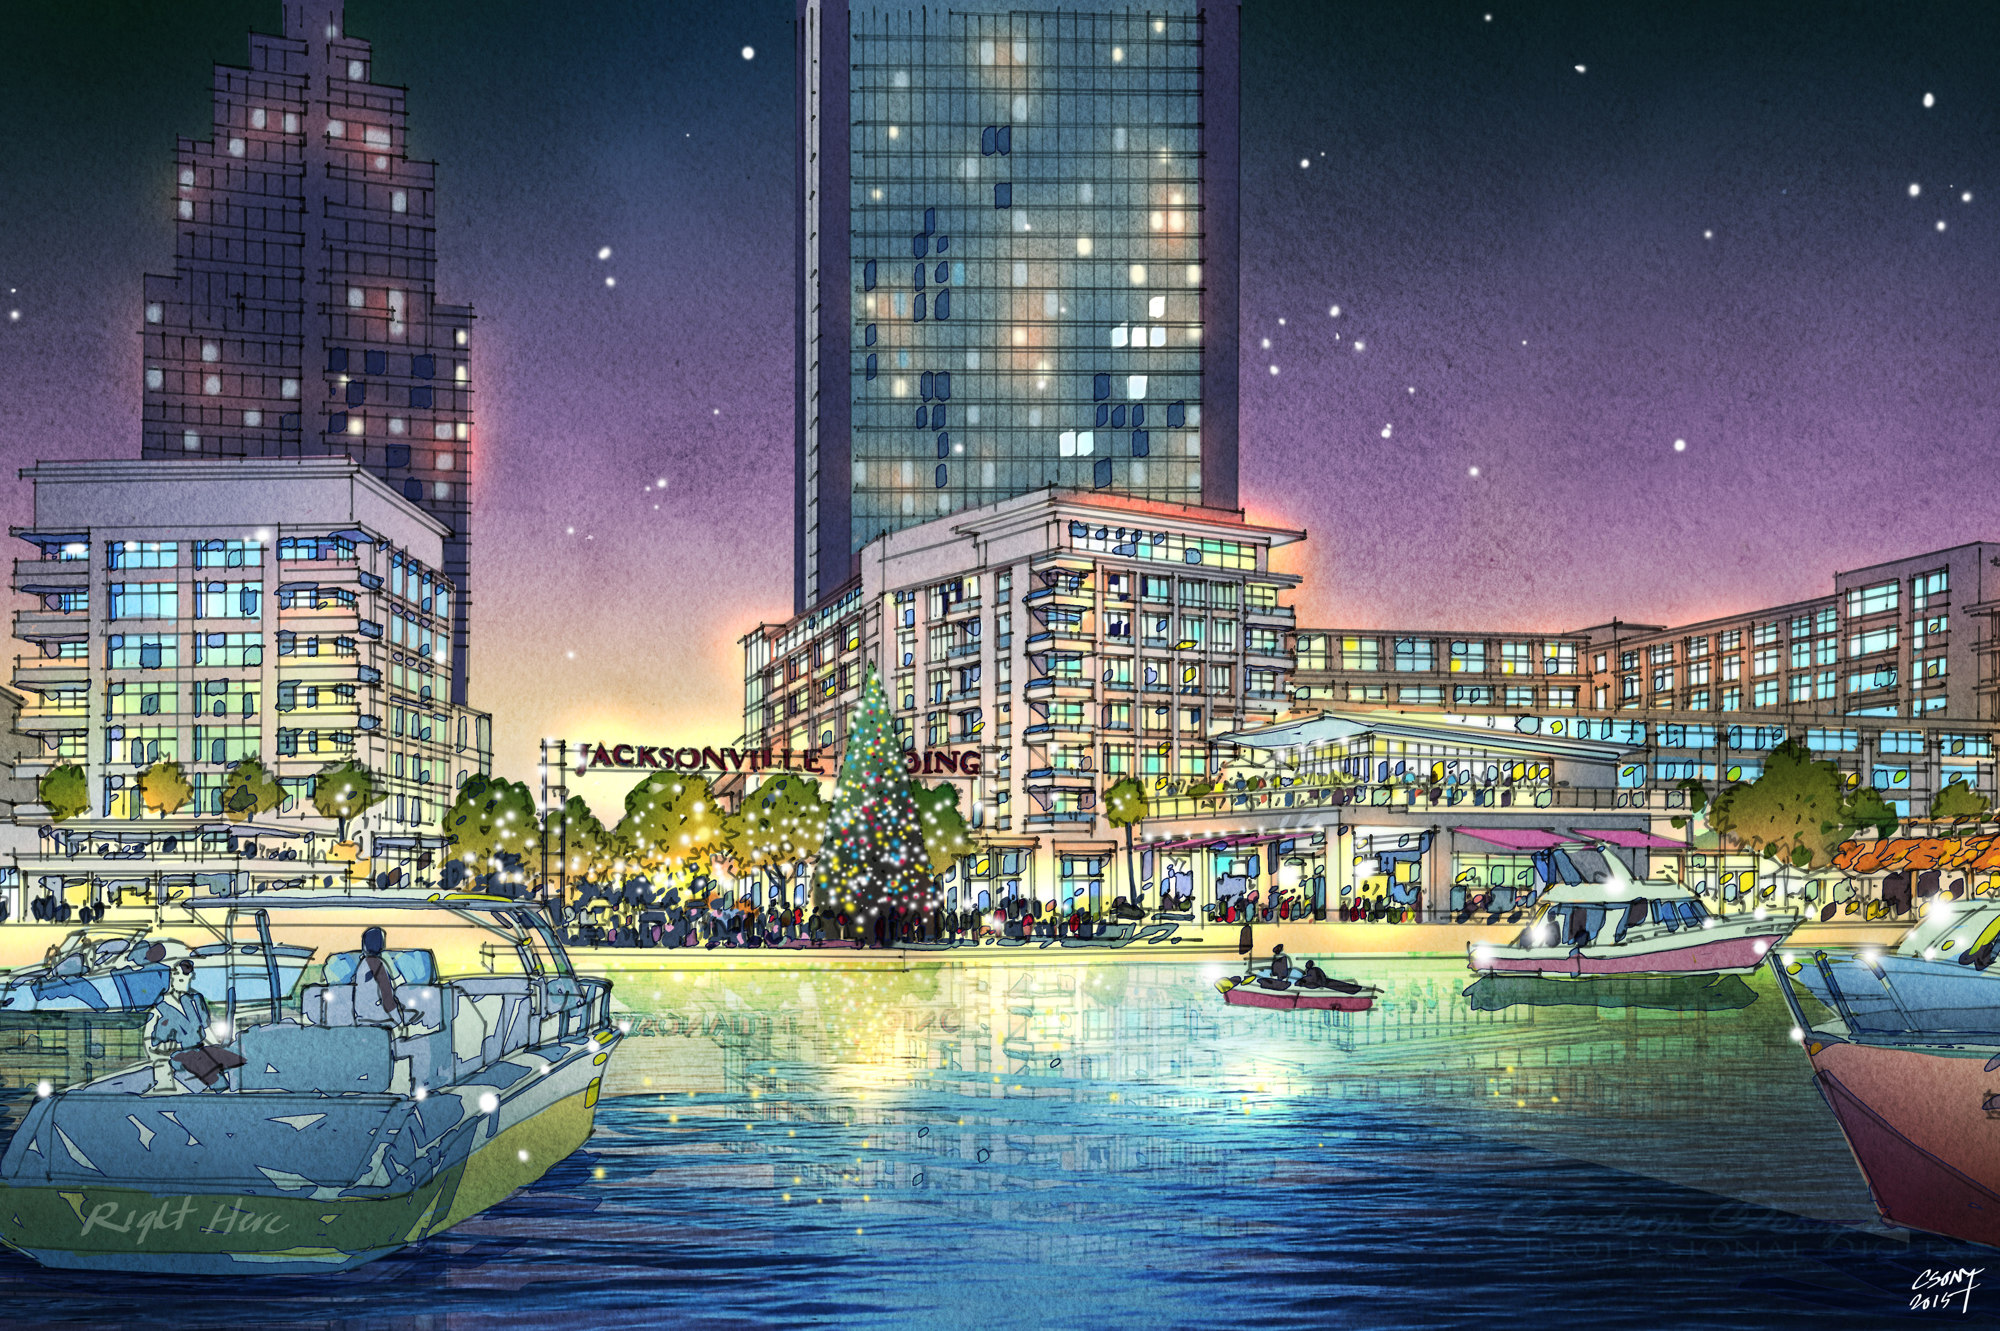 A future use of the Jacksonville Landing site is shown from the St. Johns River in this rendering from 2015.